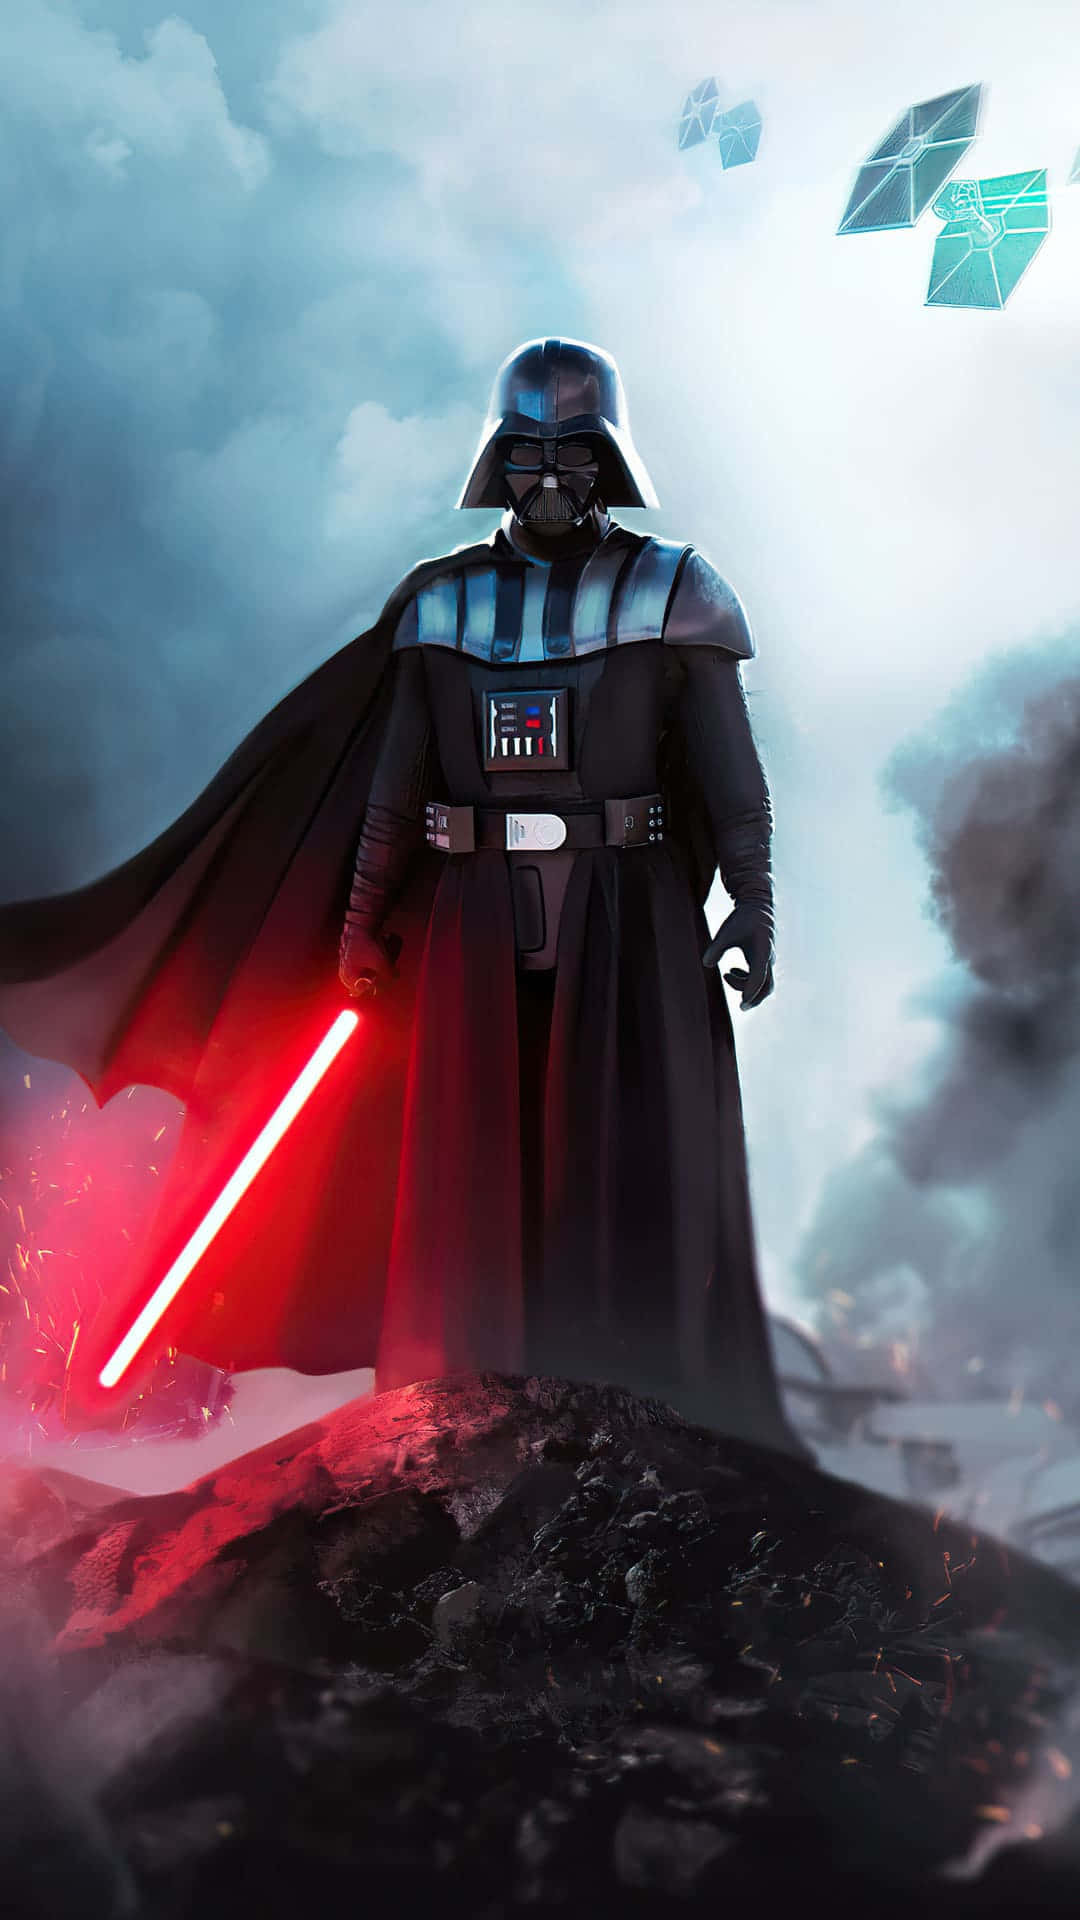 Darth Vader – The Most Iconic Villain in Movie History